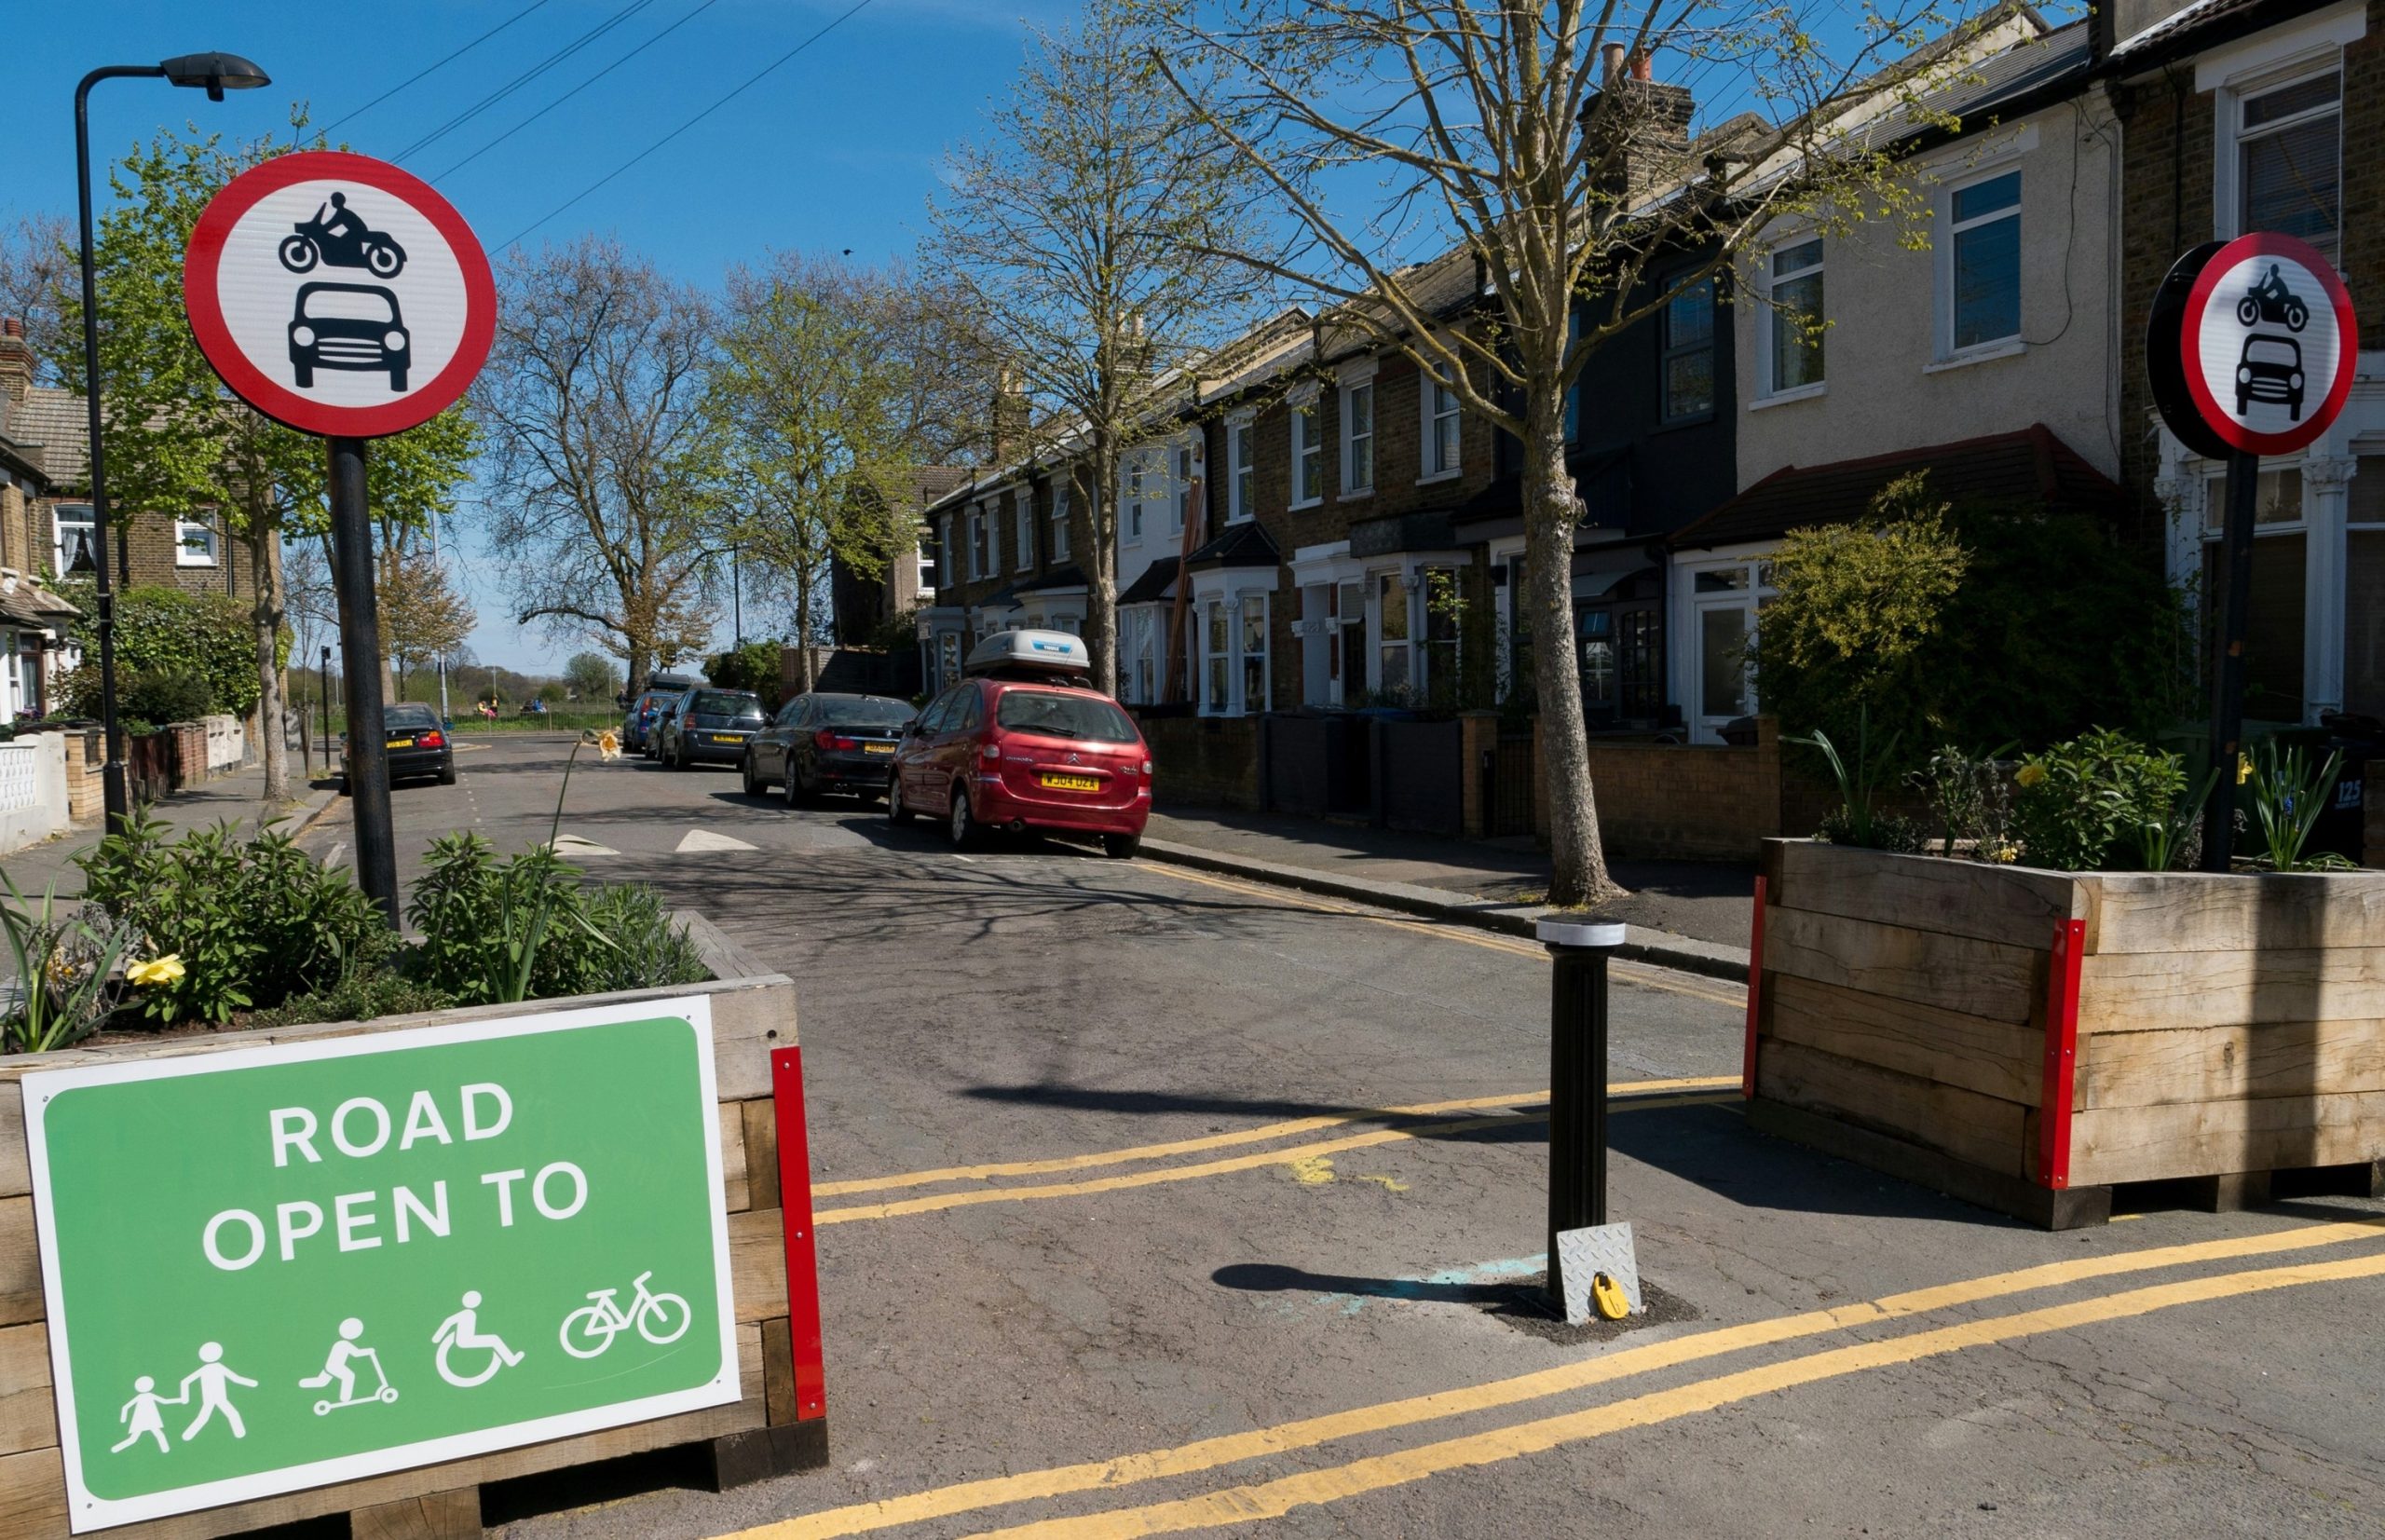 street scene showing parked cars on side of street, yellow lines painted on road, trees, sign prohibiting cars and motorbikes, green sign saying 'Road Open to' and then symbols for pedestrians, skaters, wheelchair users, and cyclists. Two large wooden plant boxes placed on either side of the road.